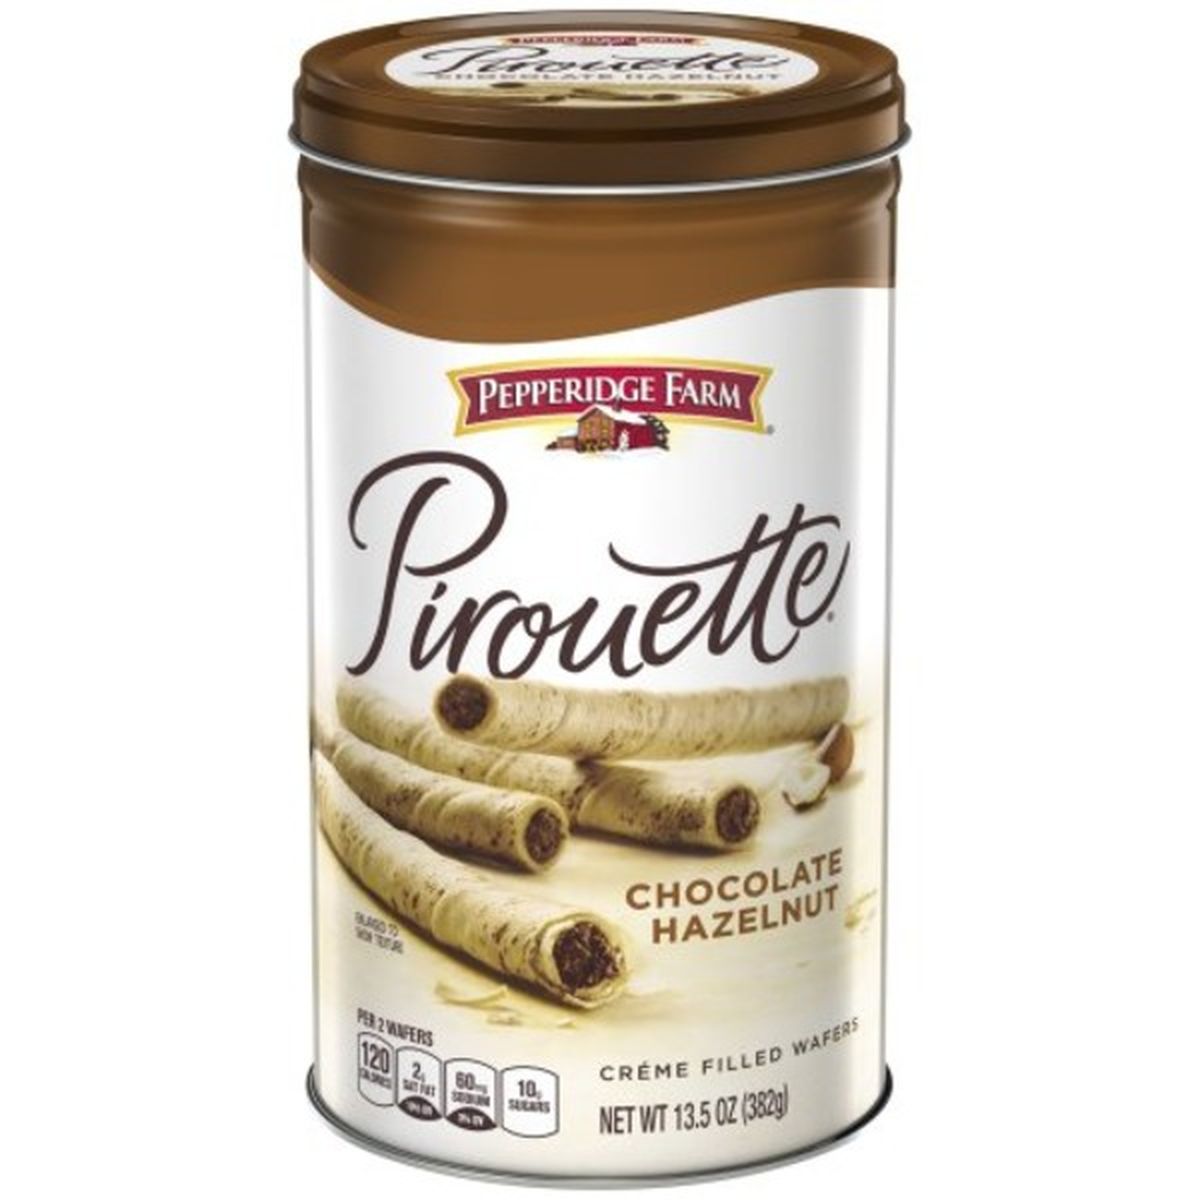 Calories in Pepperidge Farms  Pirouettes Pirouette Creme Filled Wafers Chocolate Hazelnut Cookies